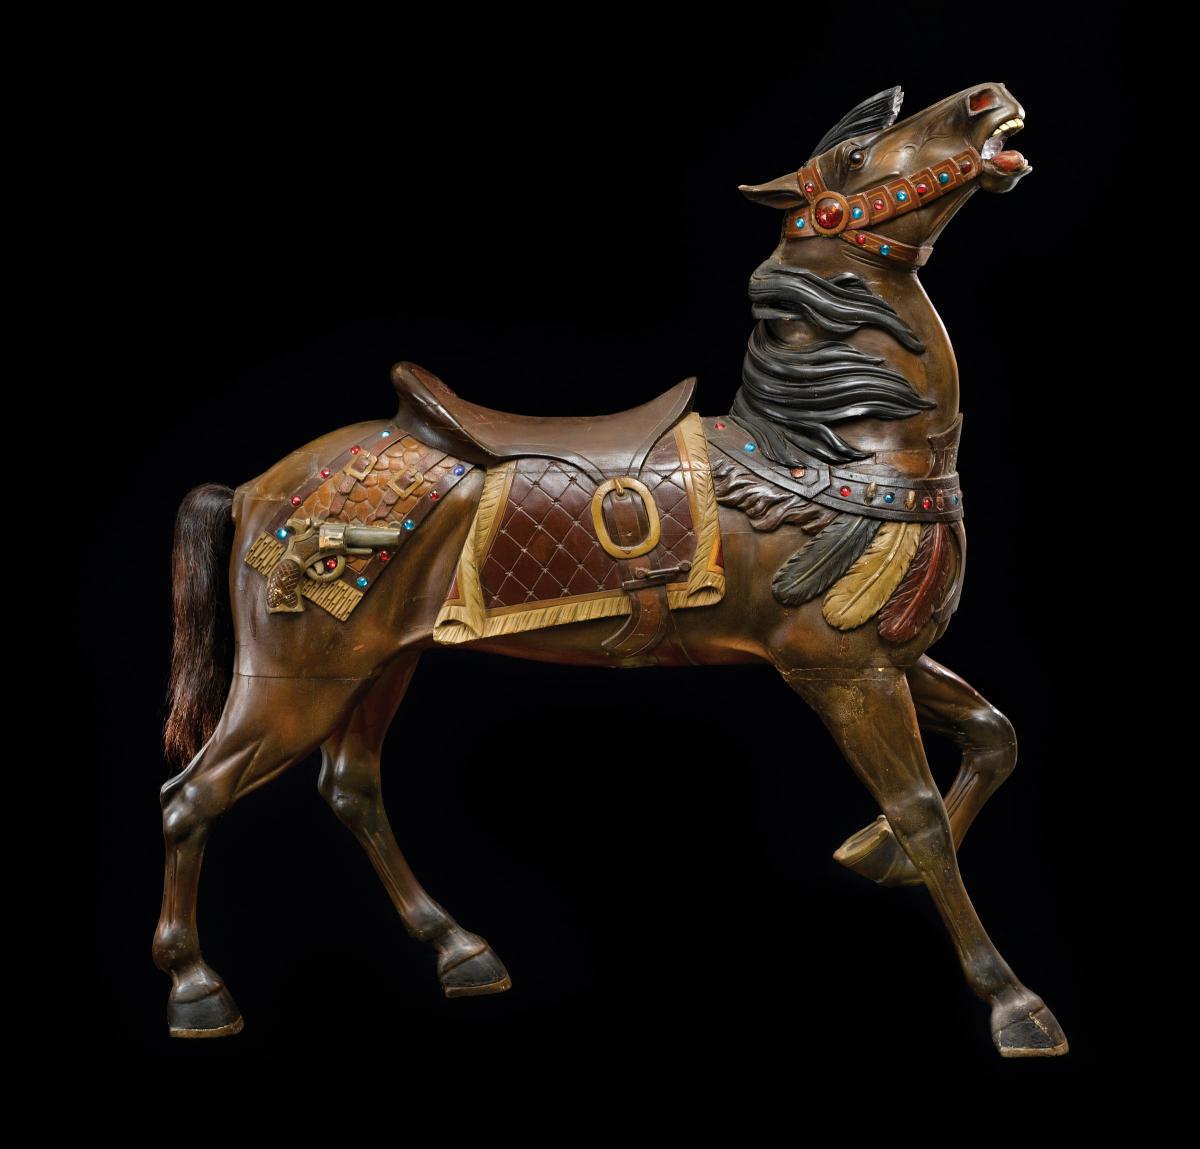 A wooden carousel horse with a raised head, made by Charles Carmel. Done in brown wood, wearing an elaborate saddle and halter